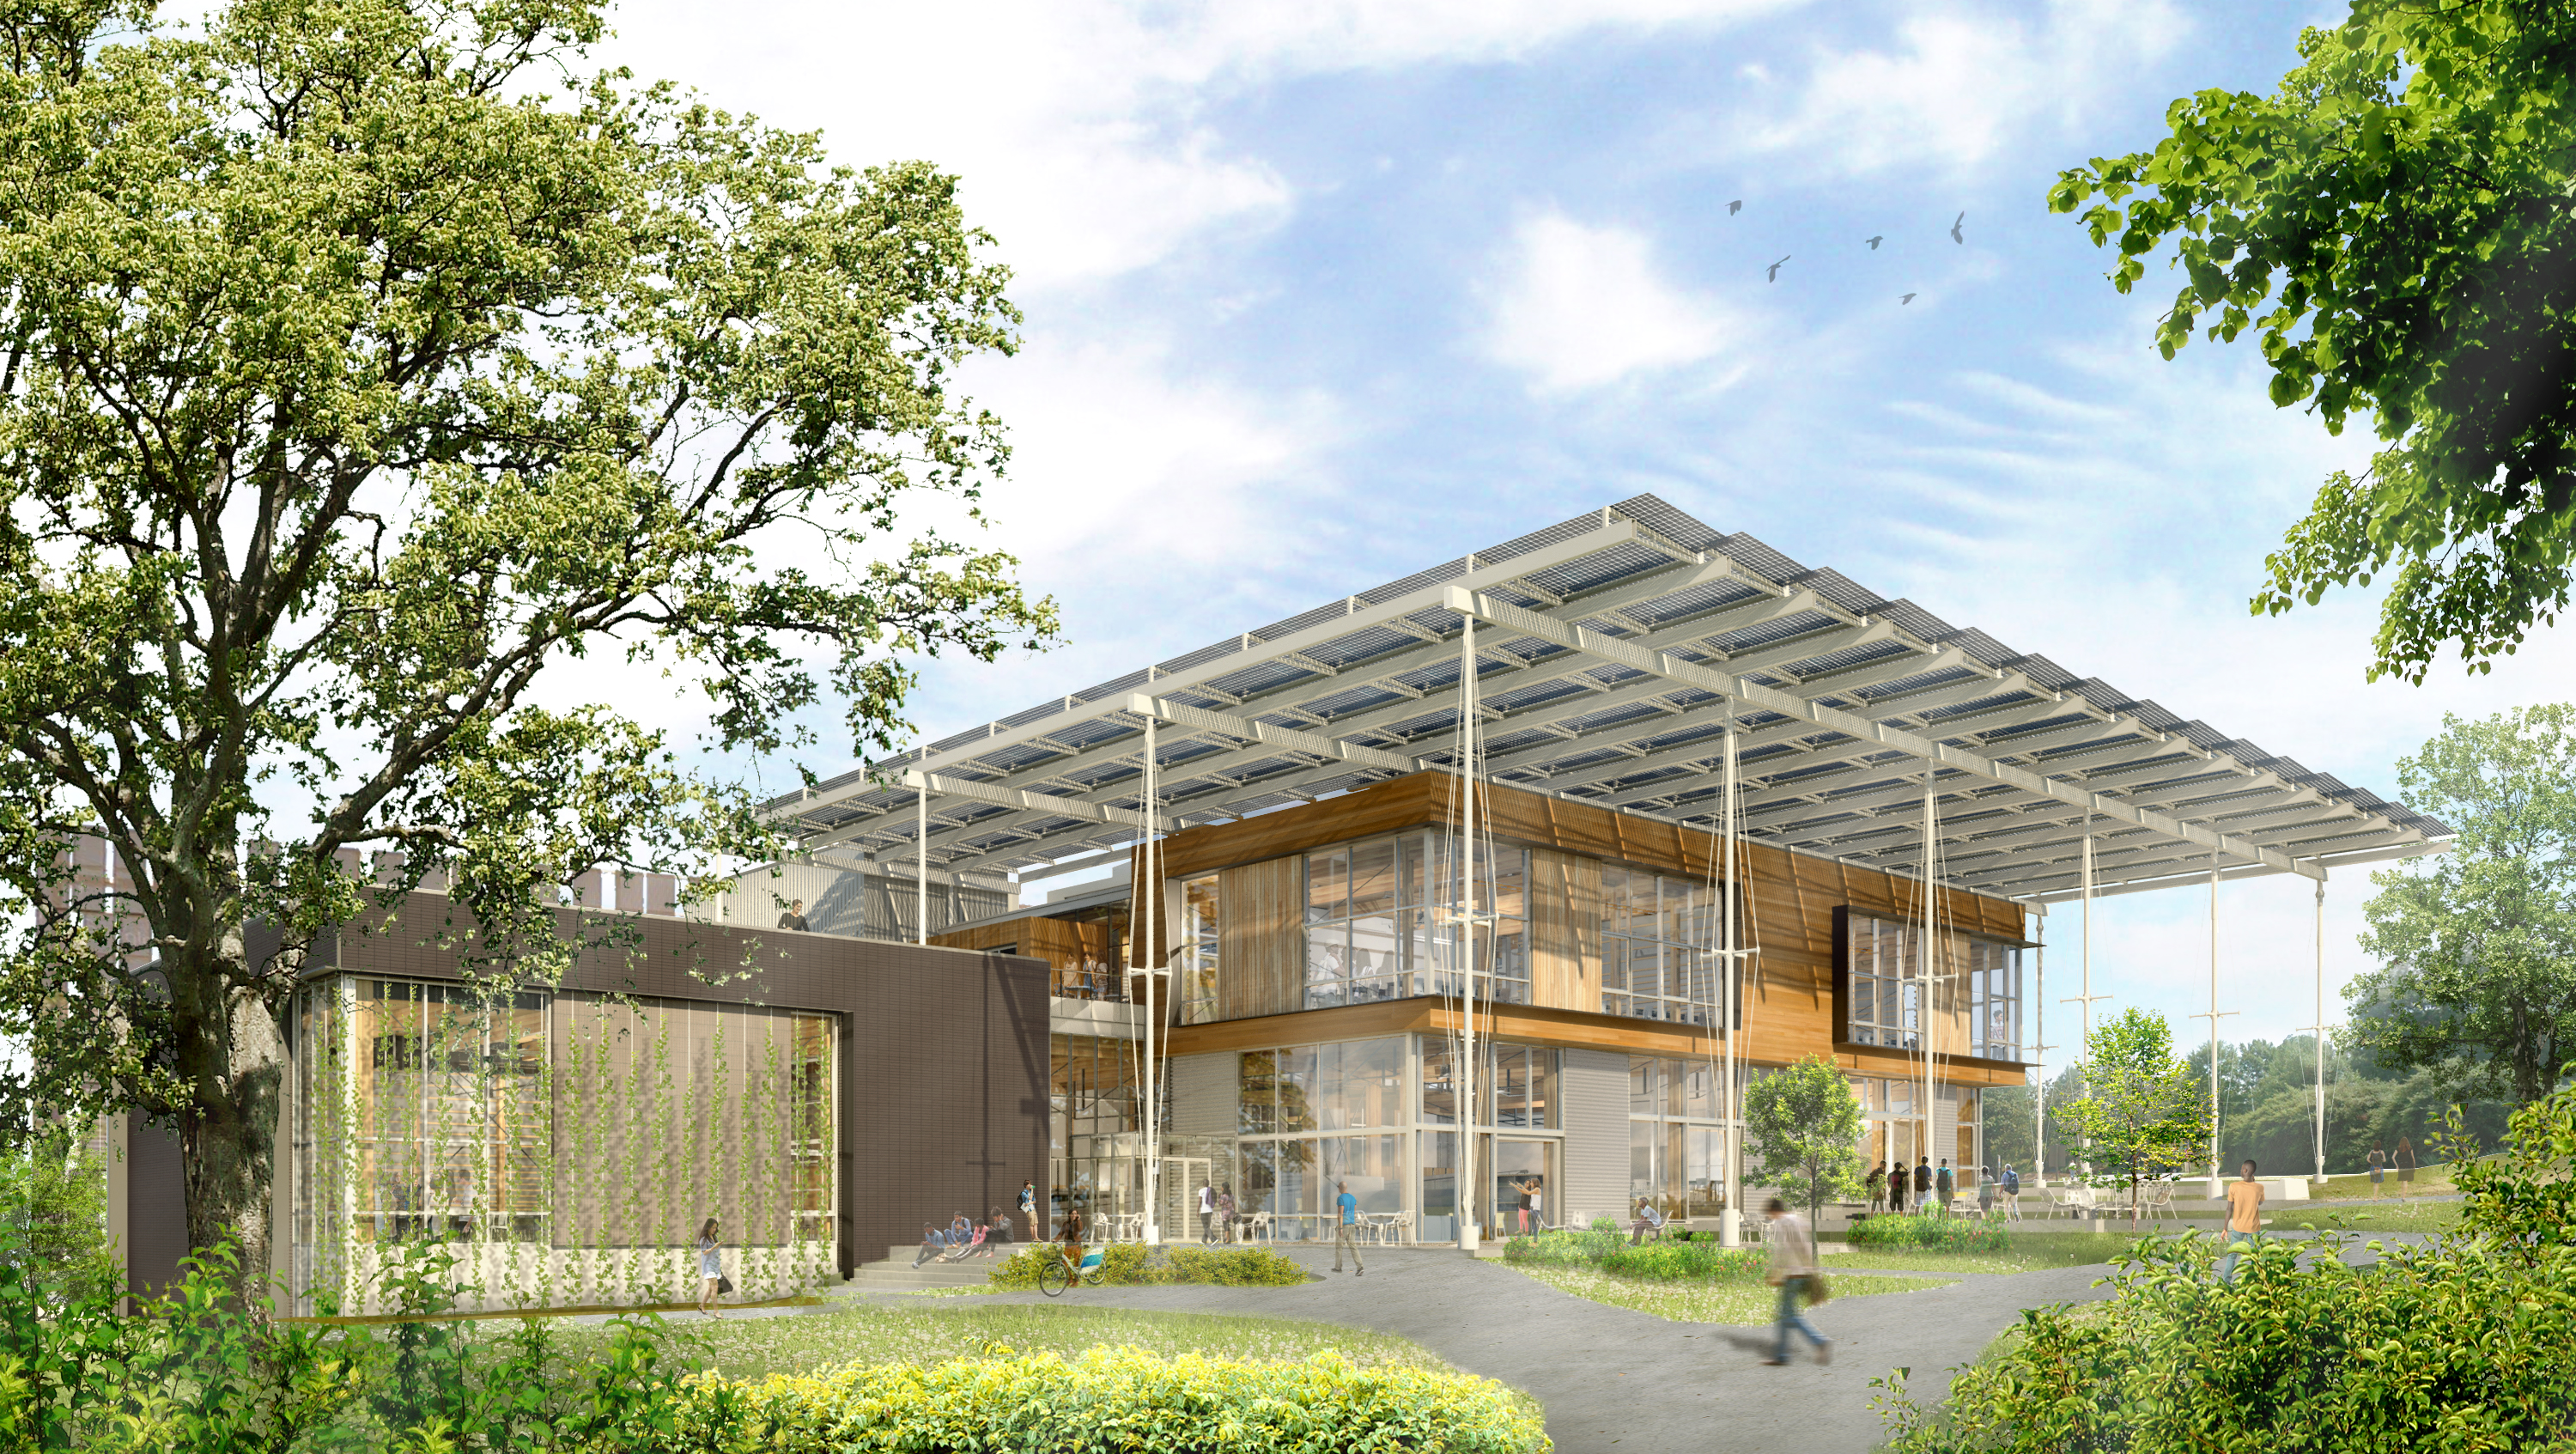 This perspective demonstrates how the Living Building's "porch" integrates the building with the Eco-Commons to the west.

Image courtesy of The Miller Hull Partnership in collaboration with Lord Aeck Sargent. 